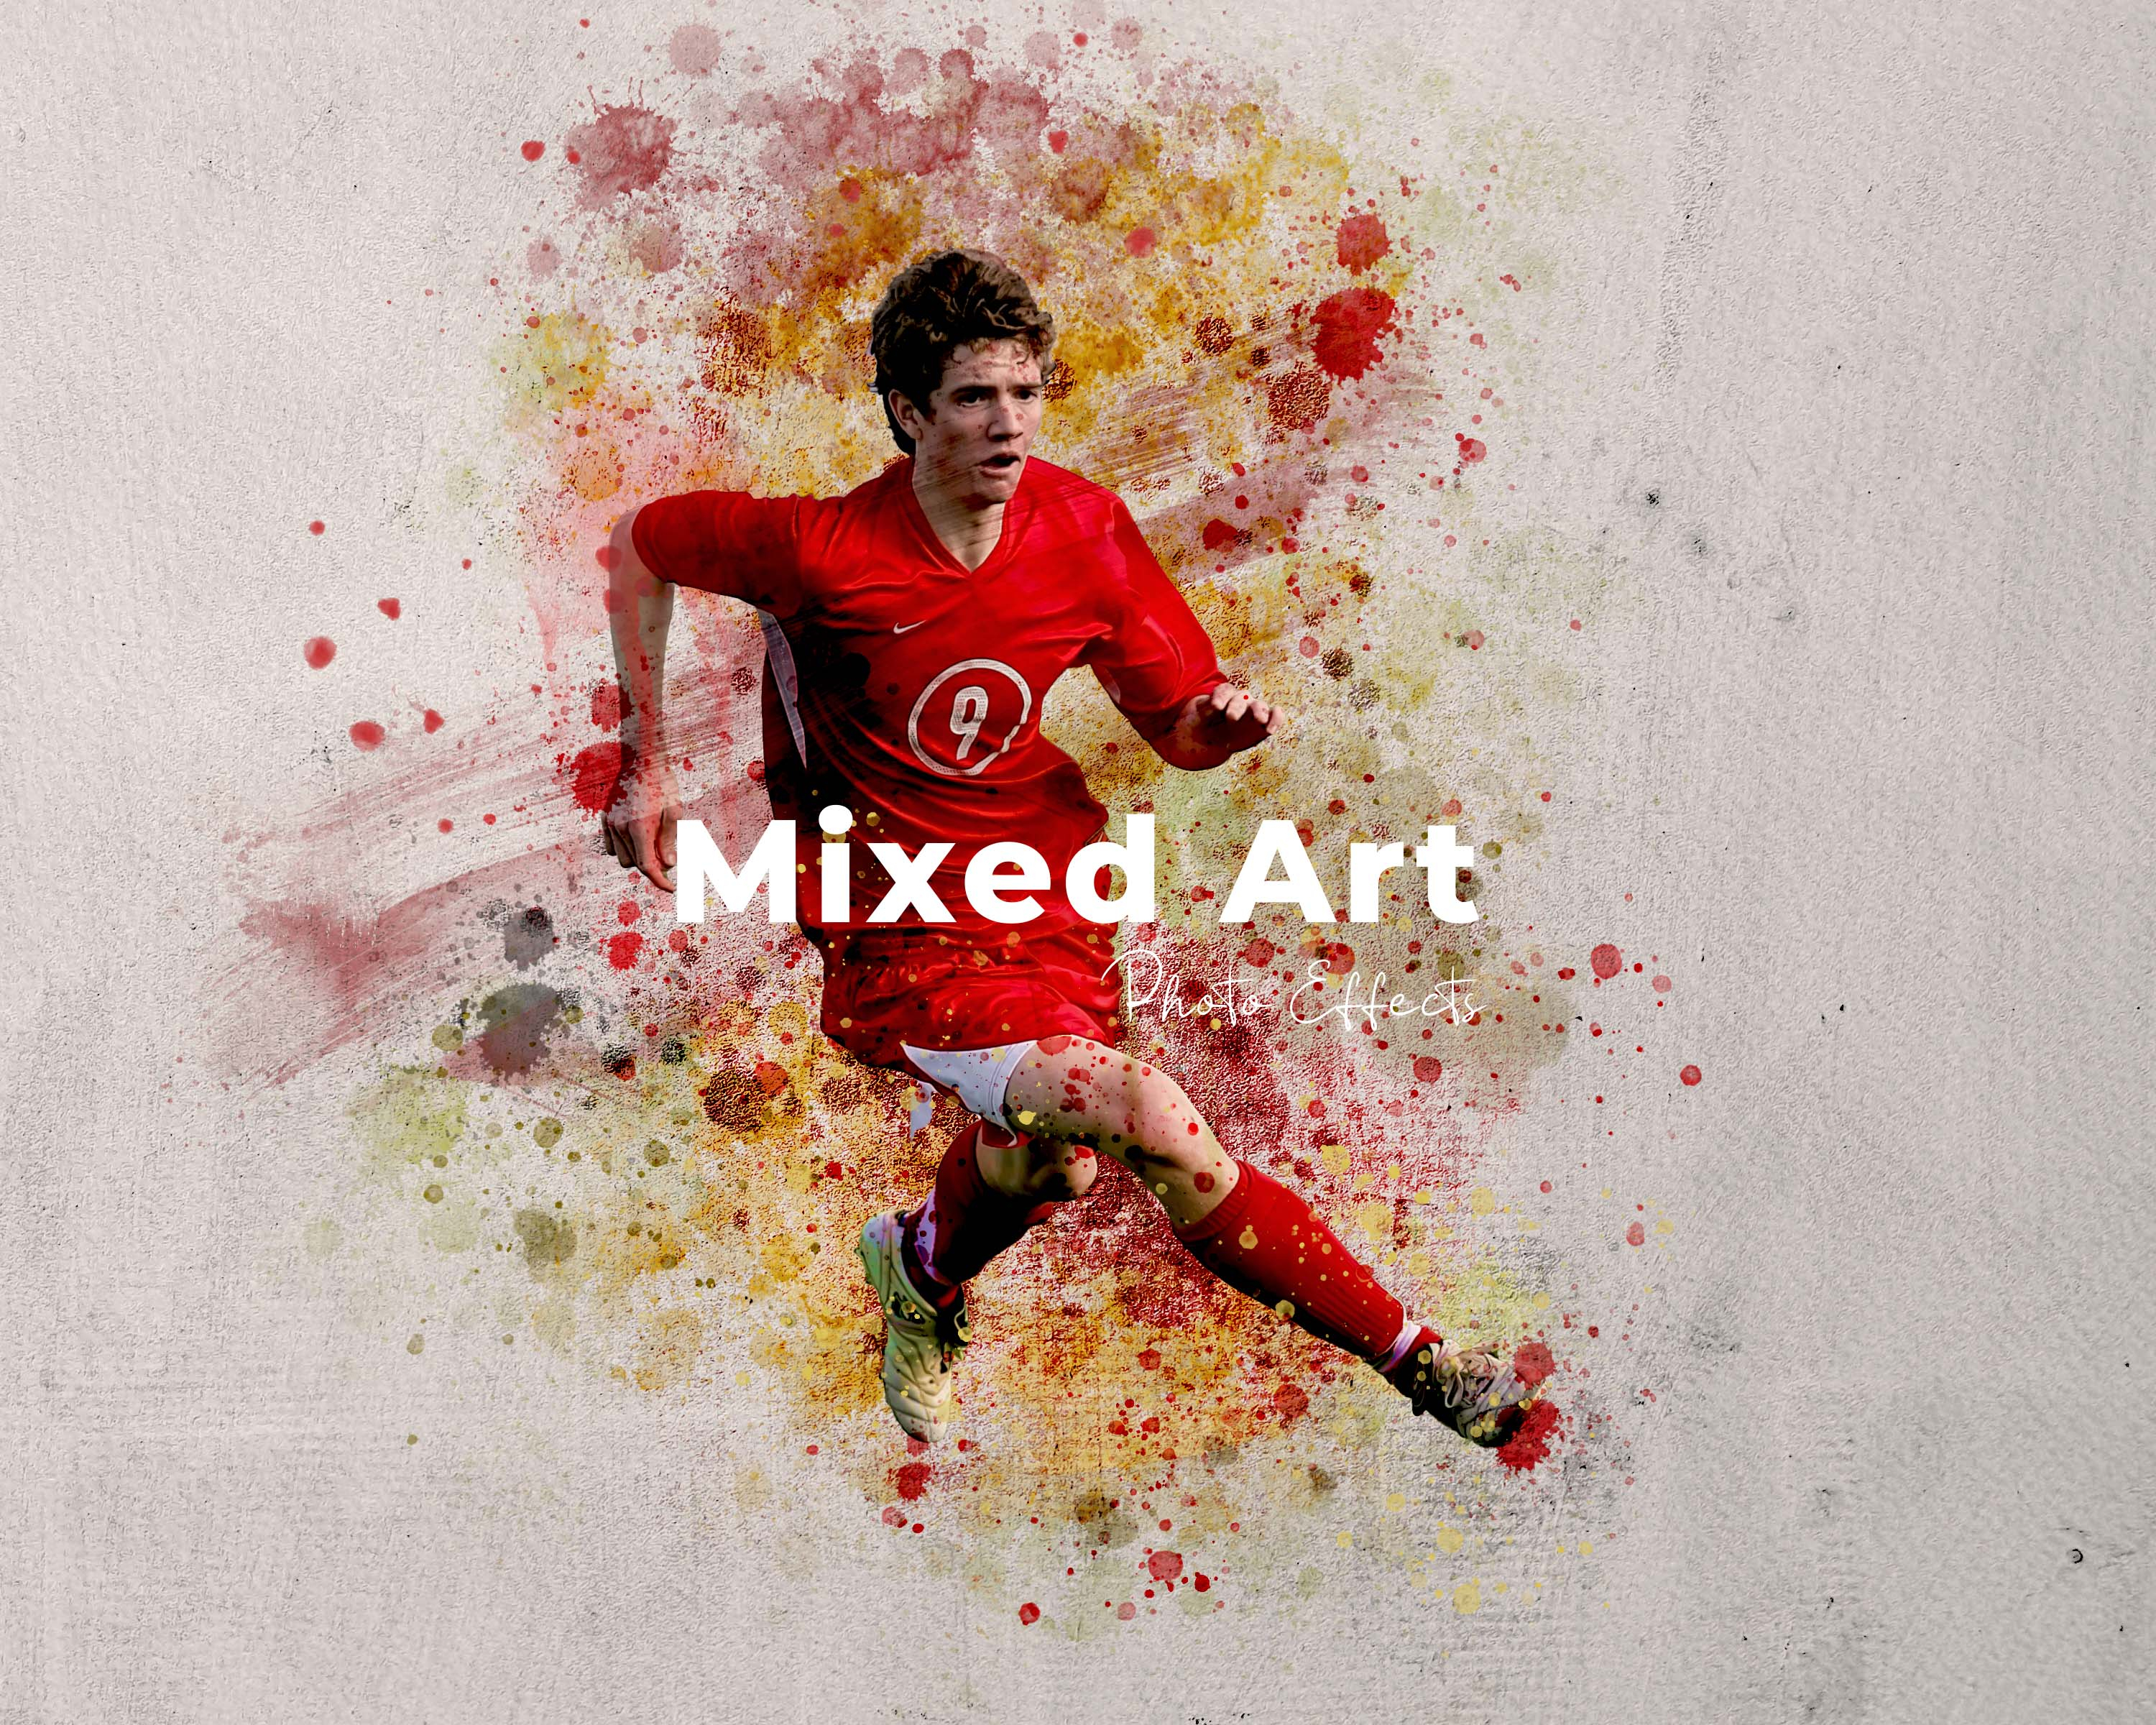 Painted Mixed Art Photo Effect Template Design